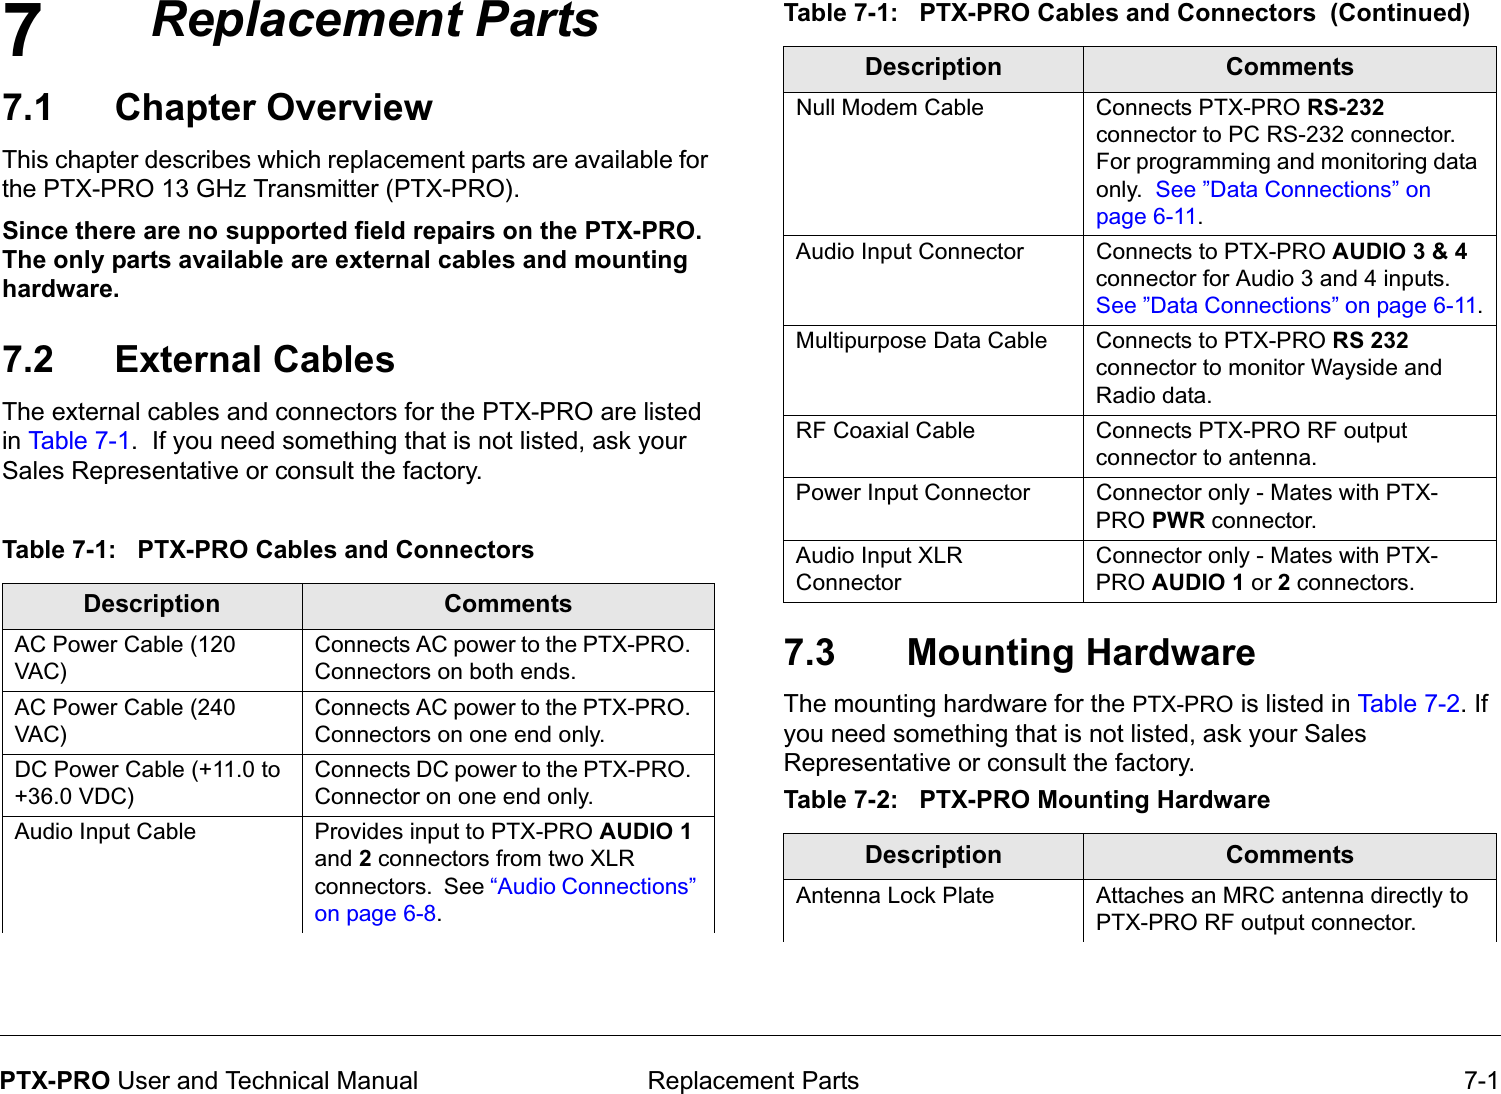 7 Replacement Parts 7-1PTX-PRO User and Technical ManualReplacement Parts7.1 Chapter OverviewThis chapter describes which replacement parts are available for the PTX-PRO 13 GHz Transmitter (PTX-PRO). Since there are no supported field repairs on the PTX-PRO. The only parts available are external cables and mounting hardware.7.2 External CablesThe external cables and connectors for the PTX-PRO are listed in Table 7-1.  If you need something that is not listed, ask your Sales Representative or consult the factory.Table 7-1:   PTX-PRO Cables and Connectors Description CommentsAC Power Cable (120 VAC)Connects AC power to the PTX-PRO.  Connectors on both ends.AC Power Cable (240 VAC)Connects AC power to the PTX-PRO.  Connectors on one end only.DC Power Cable (+11.0 to +36.0 VDC)Connects DC power to the PTX-PRO.  Connector on one end only.Audio Input Cable Provides input to PTX-PRO AUDIO 1 and 2 connectors from two XLR connectors.  See “Audio Connections” on page 6-8.7.3  Mounting HardwareThe mounting hardware for the PTX-PRO is listed in Table 7-2. If you need something that is not listed, ask your Sales Representative or consult the factory.Null Modem Cable Connects PTX-PRO RS-232 connector to PC RS-232 connector.  For programming and monitoring data only.  See ”Data Connections” on page 6-11.Audio Input Connector Connects to PTX-PRO AUDIO 3 &amp; 4 connector for Audio 3 and 4 inputs.  See ”Data Connections” on page 6-11.Multipurpose Data Cable Connects to PTX-PRO RS 232 connector to monitor Wayside and Radio data.RF Coaxial Cable Connects PTX-PRO RF output connector to antenna.Power Input Connector Connector only - Mates with PTX-PRO PWR connector.Audio Input XLR ConnectorConnector only - Mates with PTX-PRO AUDIO 1 or 2 connectors.Table 7-2:   PTX-PRO Mounting Hardware Description CommentsAntenna Lock Plate Attaches an MRC antenna directly to PTX-PRO RF output connector.Table 7-1:   PTX-PRO Cables and Connectors  (Continued)Description Comments